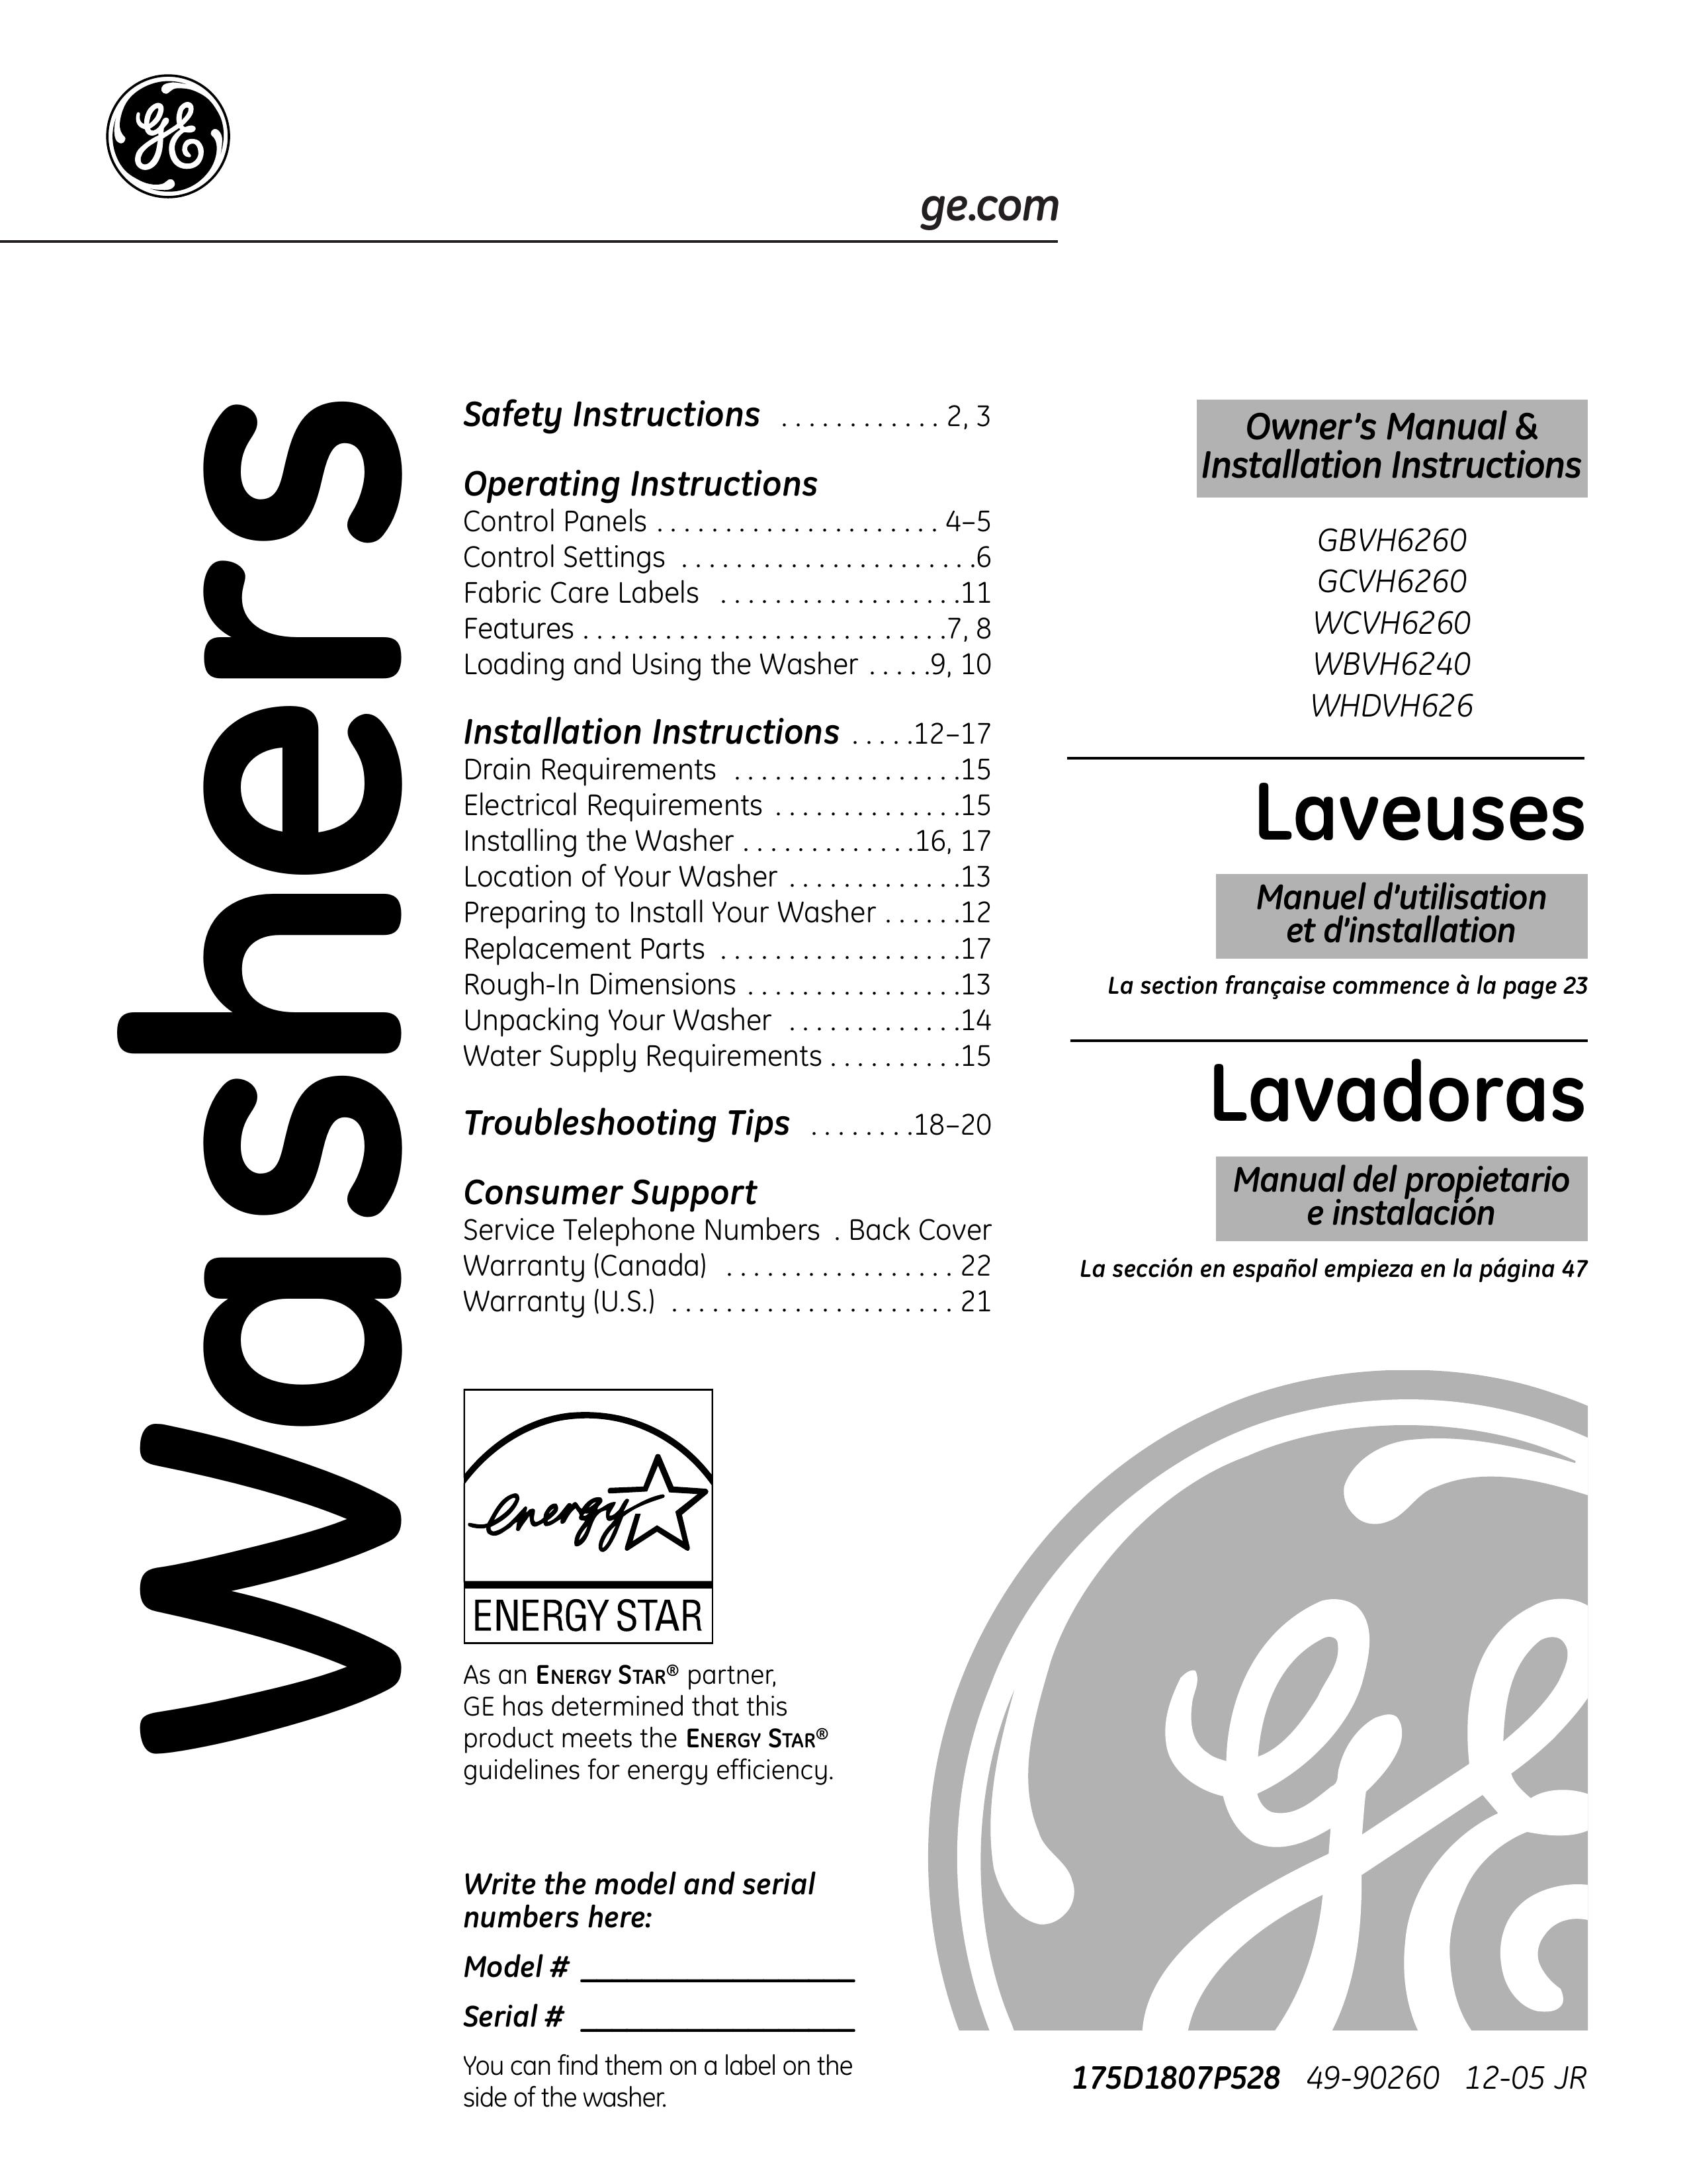 GE GCVH6260 Washer User Manual